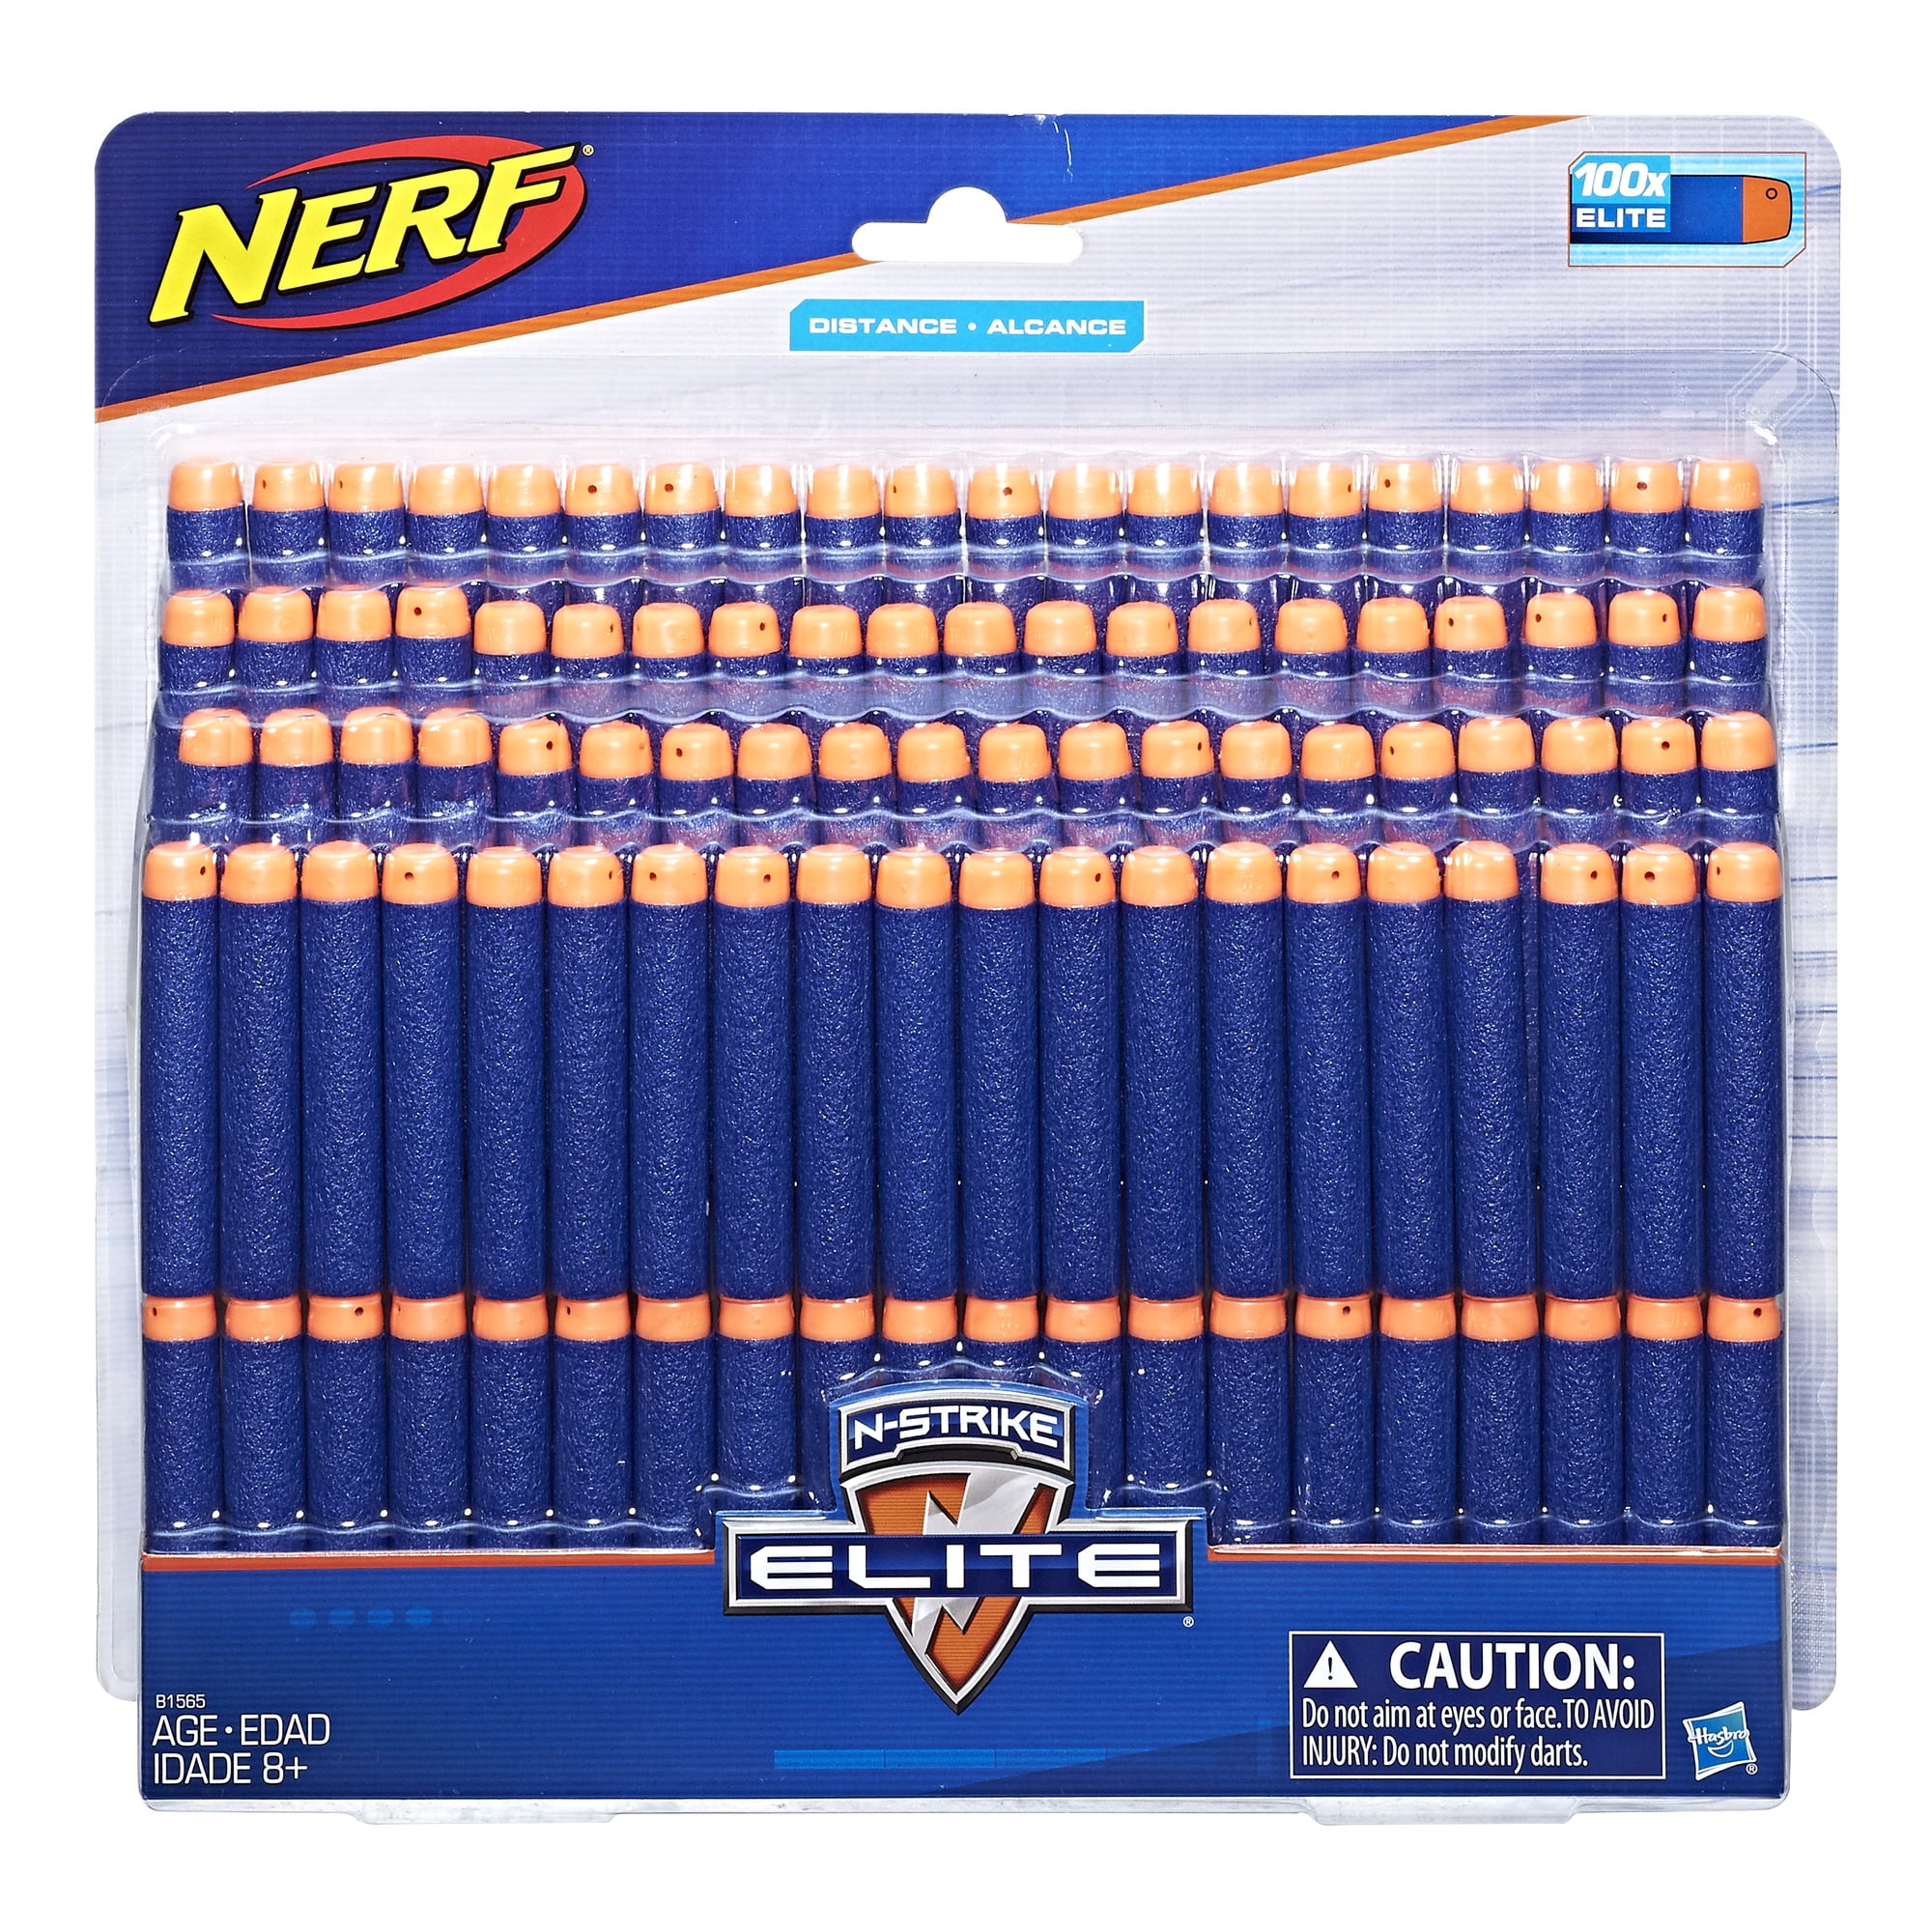 Details about   NERF Nstrike Elite Darts Personalized